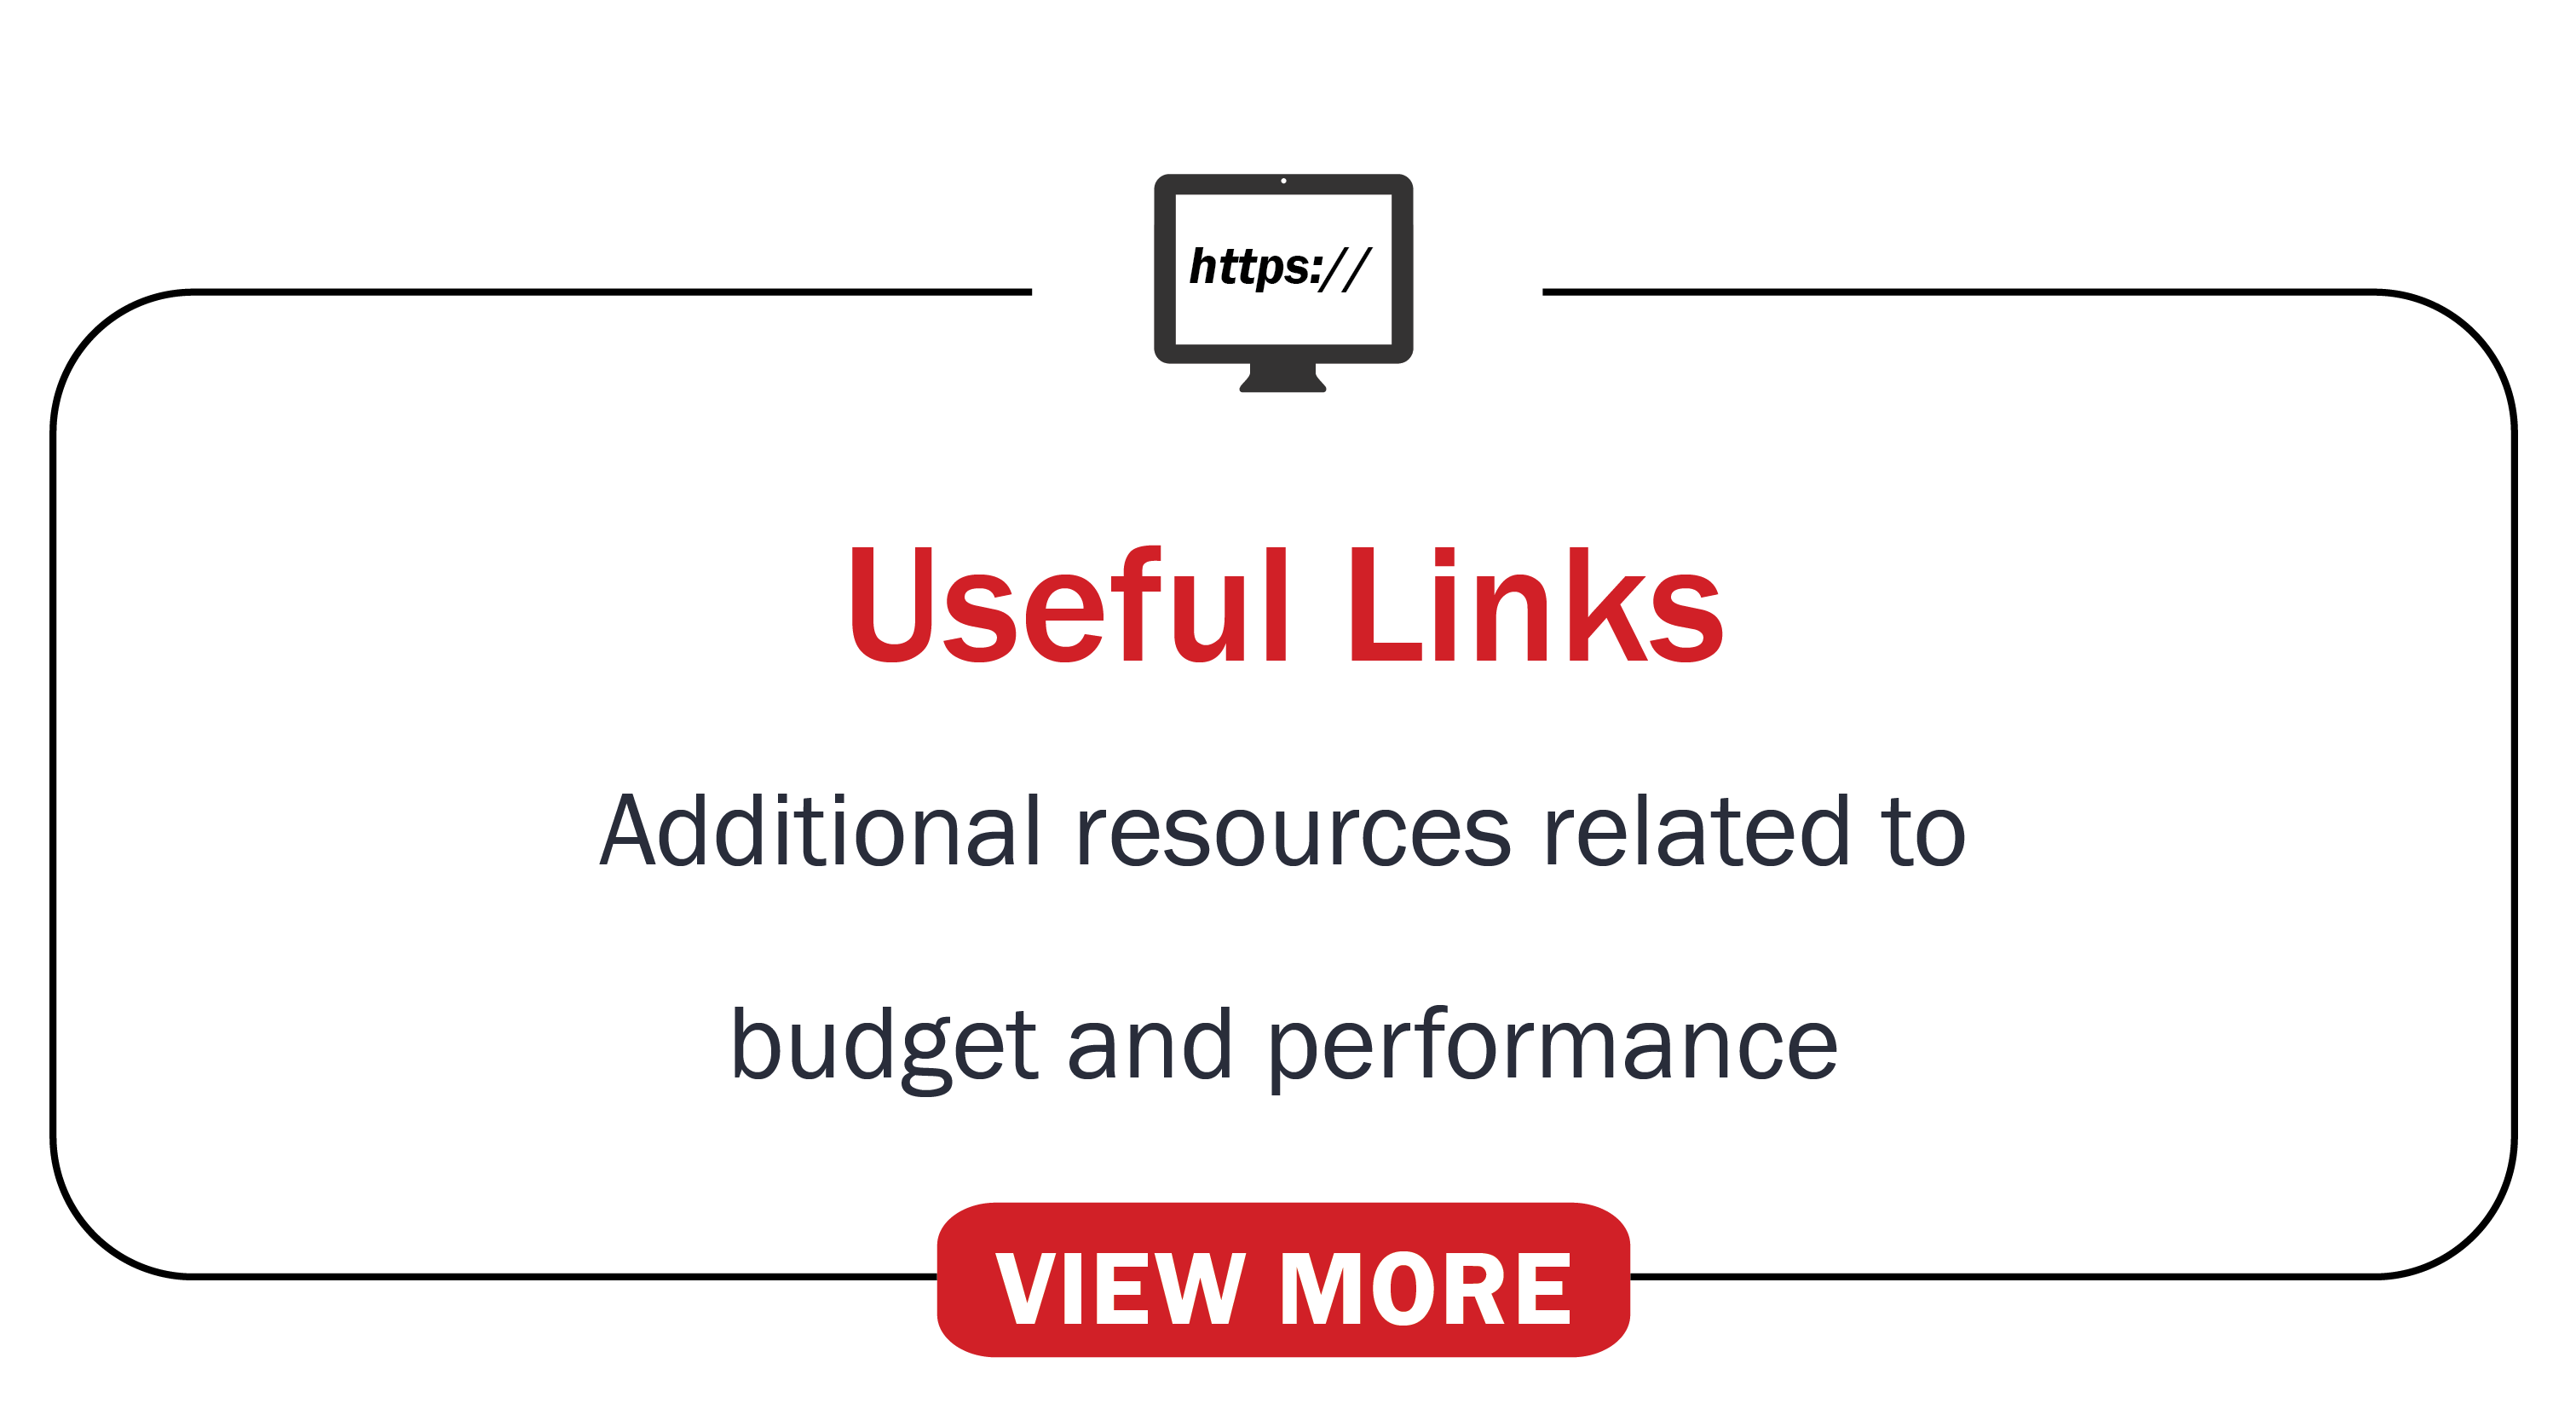 Useful Links: Additional resources related to budget and performance